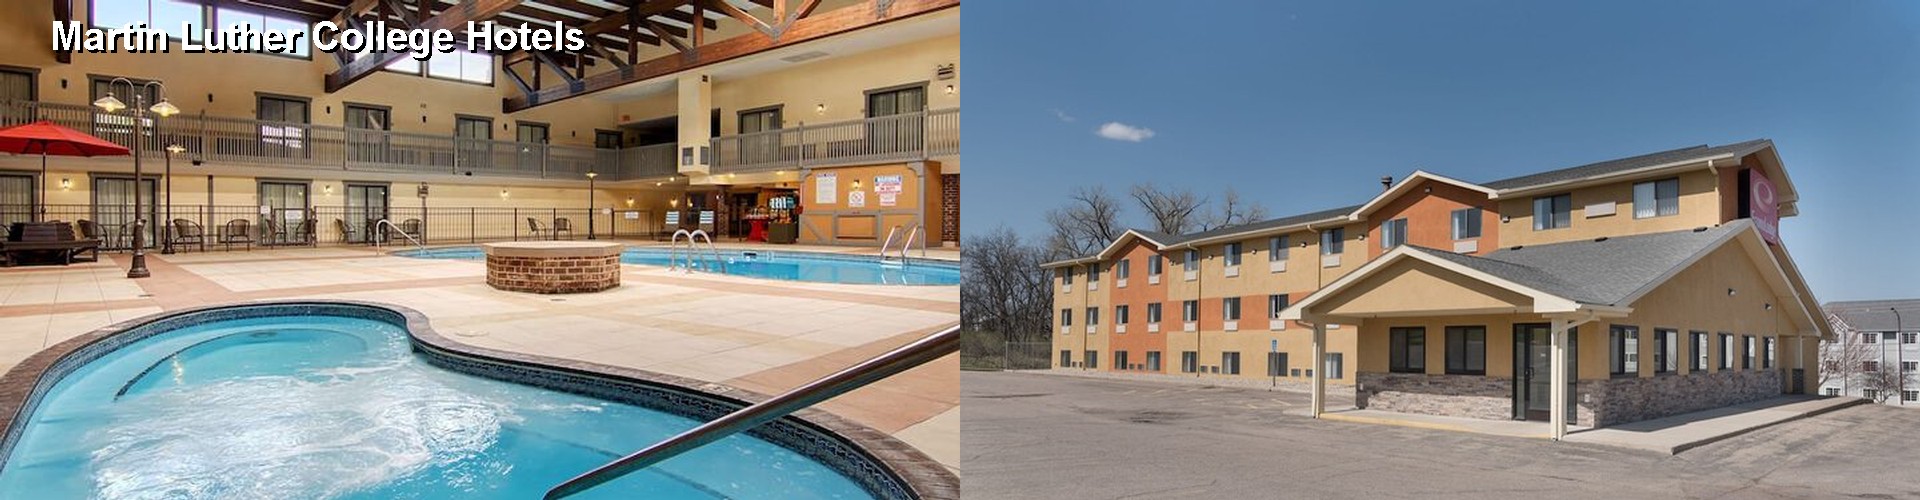 5 Best Hotels near Martin Luther College